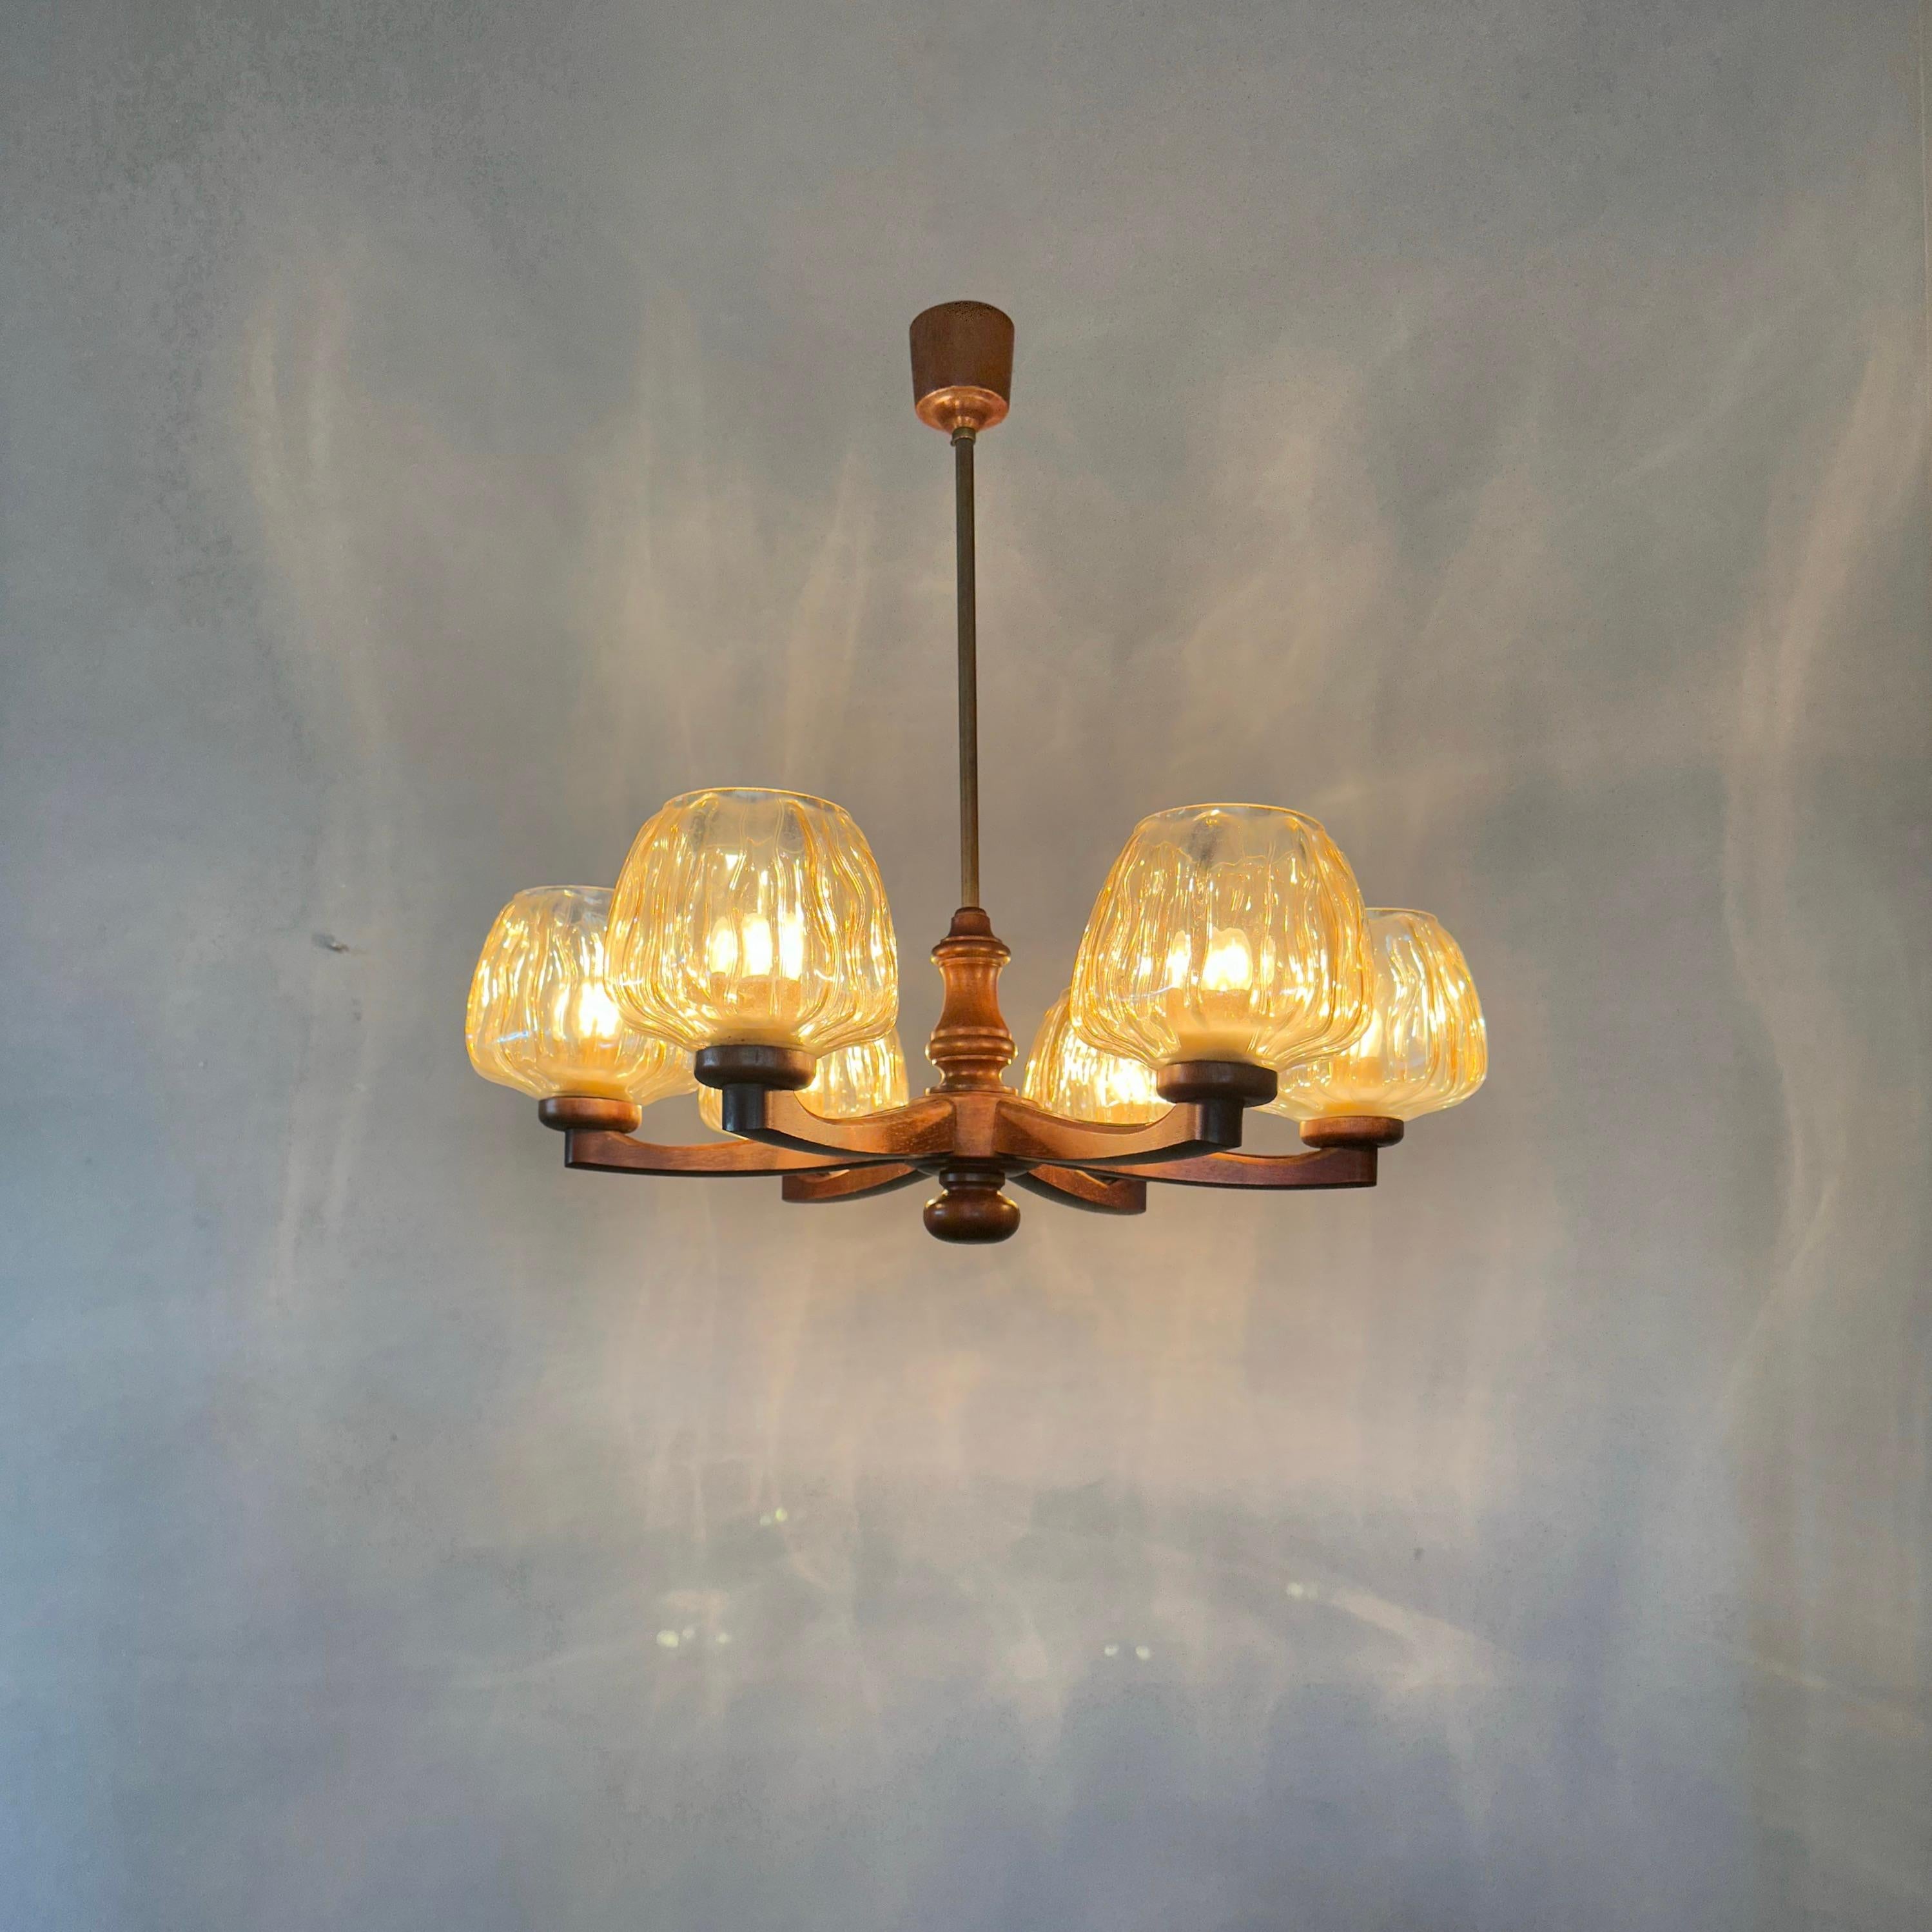 Scandinavian Sophisticated Mid-Century Modern 6 Light Chandelier with Art Glass Shades 1960s For Sale